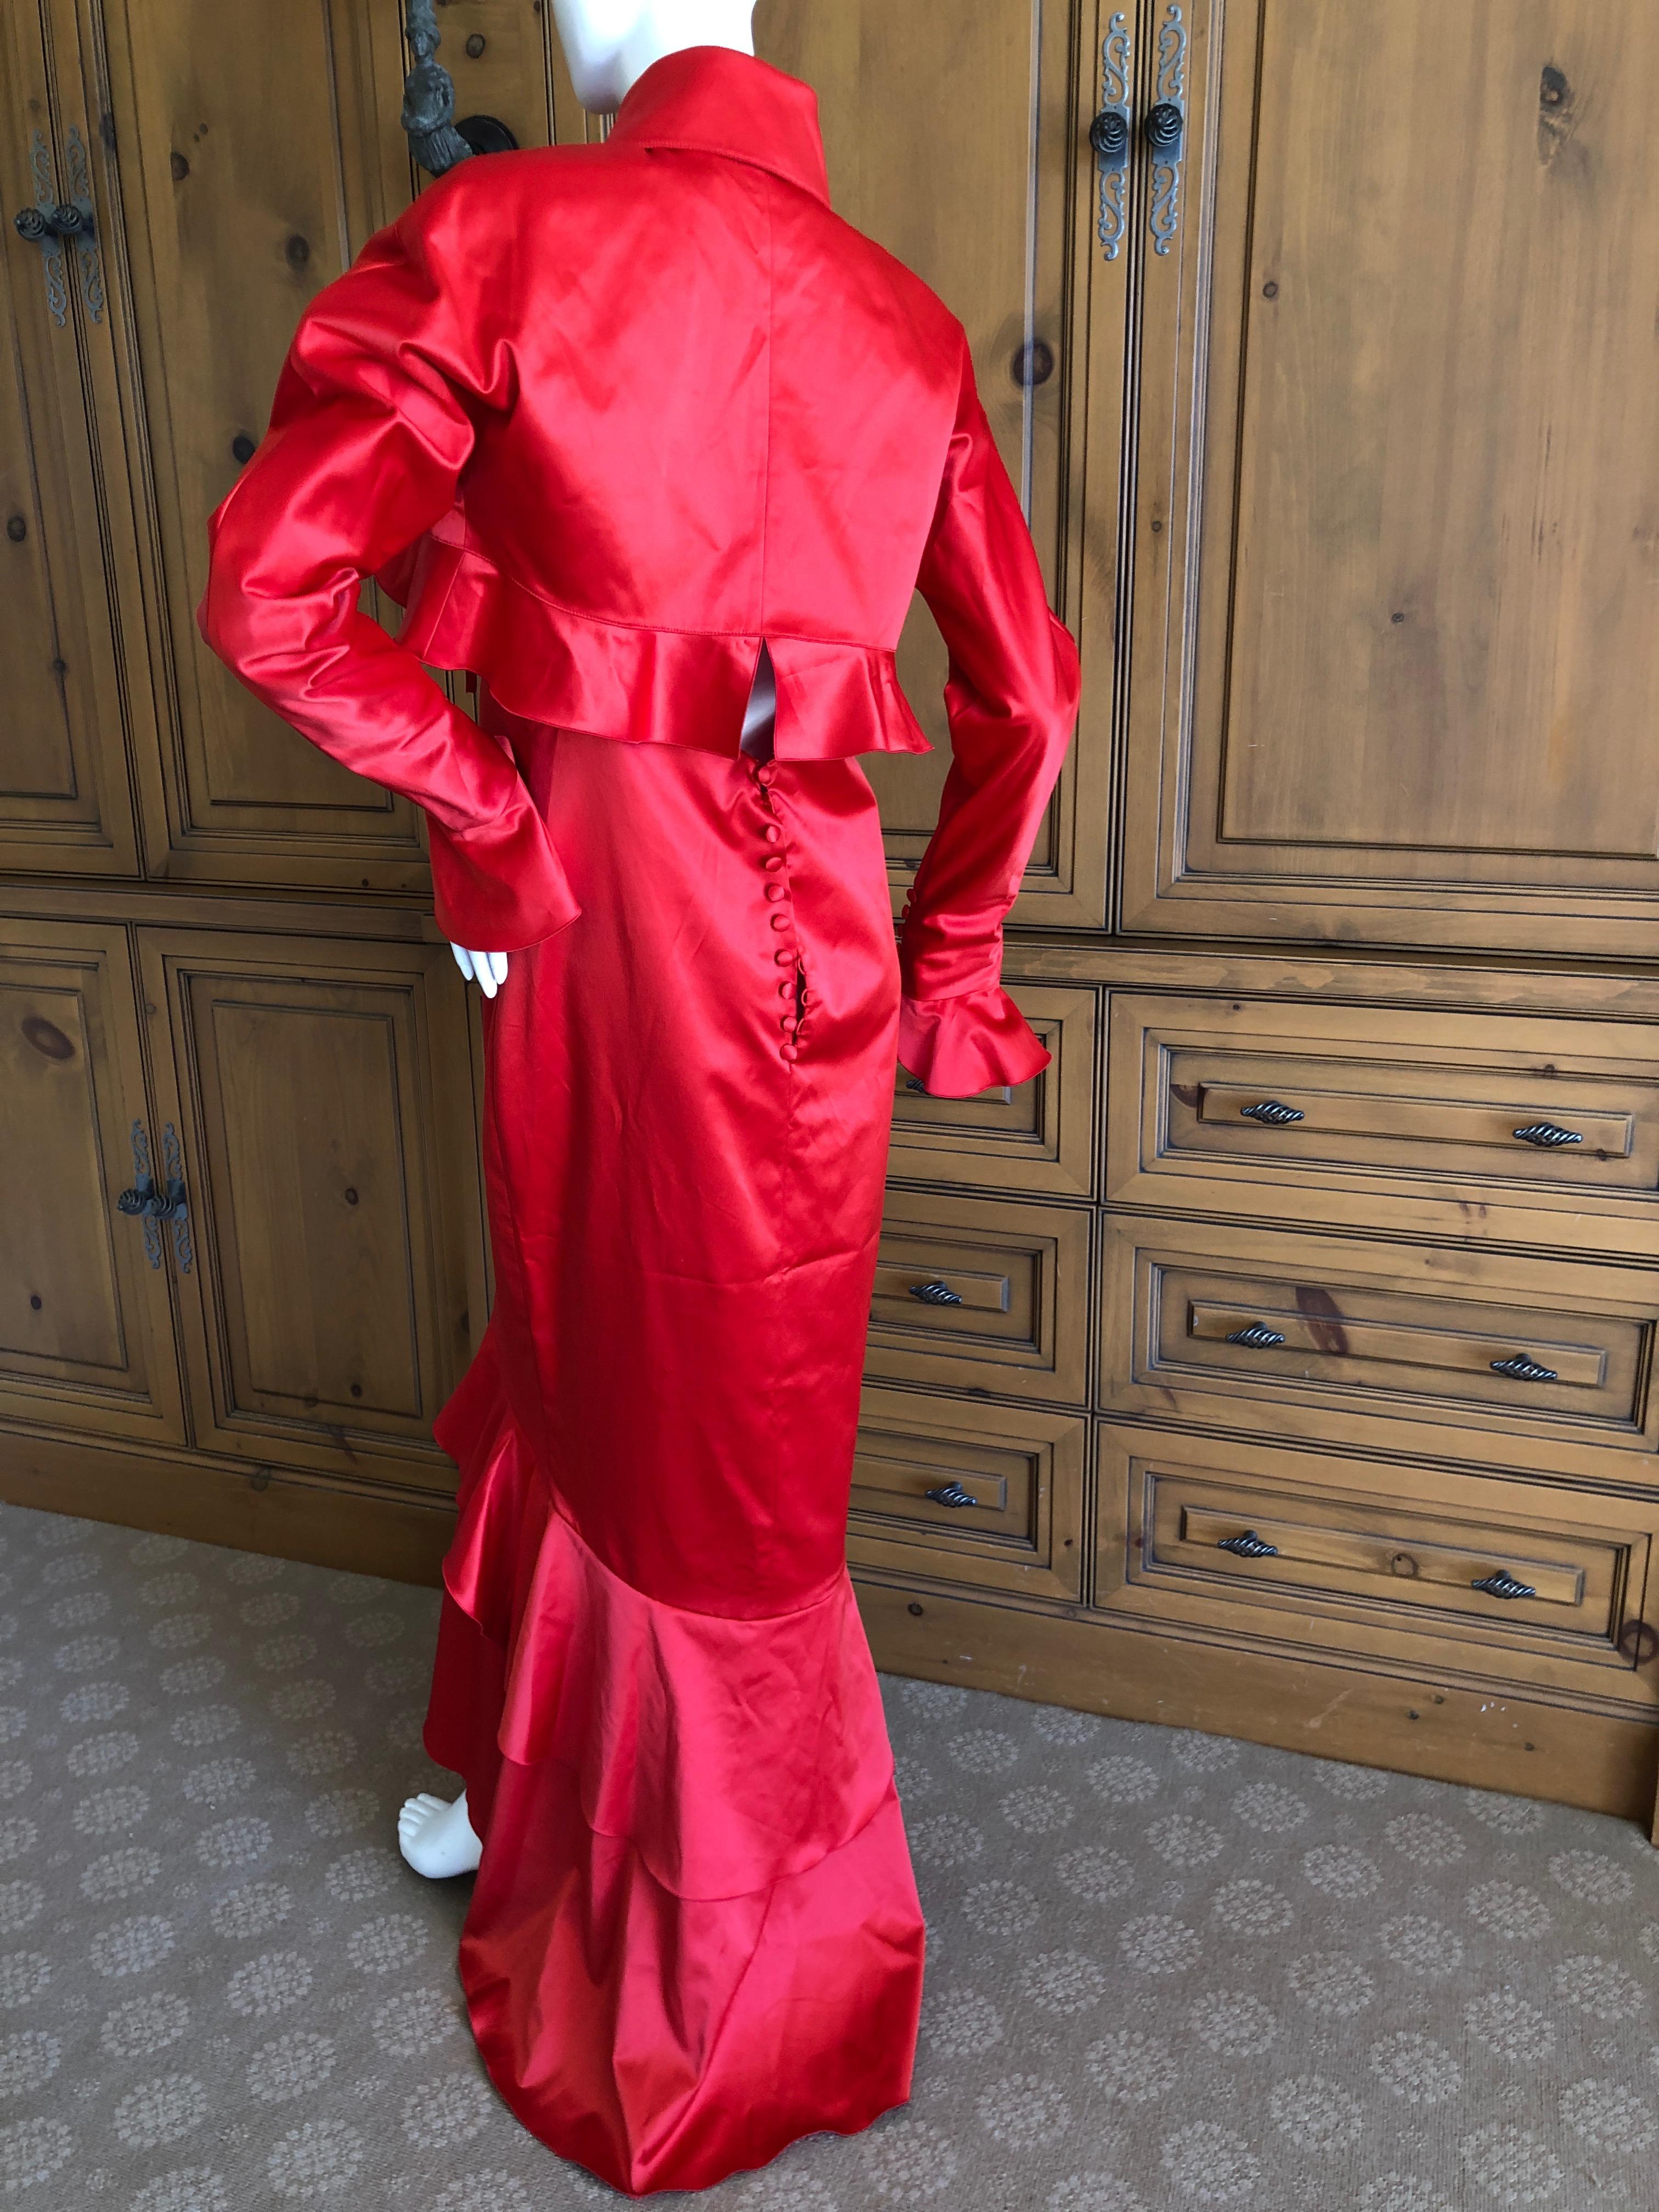 Karl Lagerfeld 1980's Red Evening Dress with Matching Jacket Lagerfeld Gallery 6